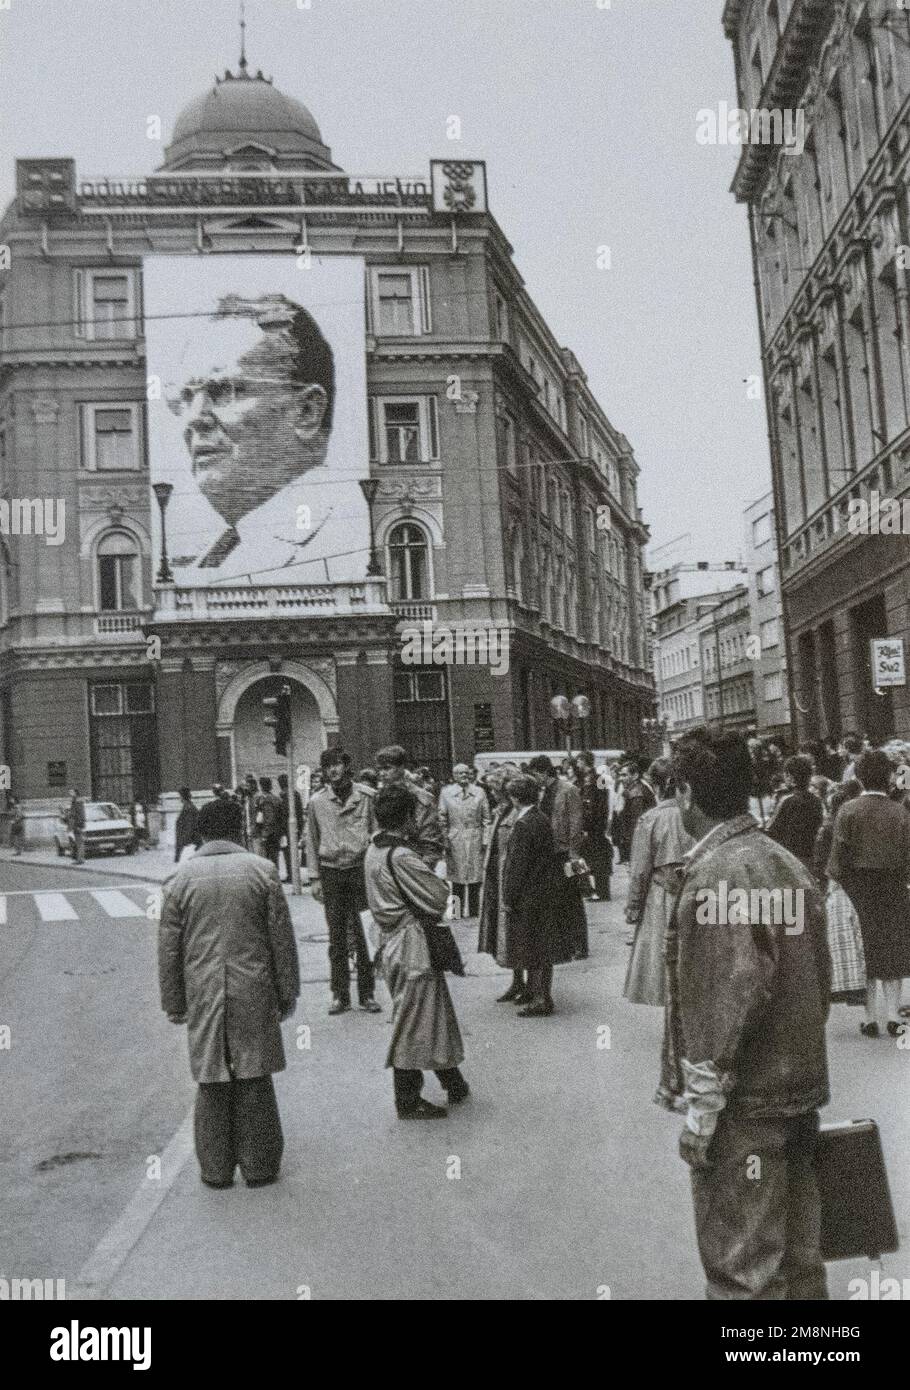 Yugoslavia: May 4 at 3-05 pm - sirens signaling a moment of silence to pay tribute to Josip Broz Tito - Moment of Silence in Sarajevo Stock Photo